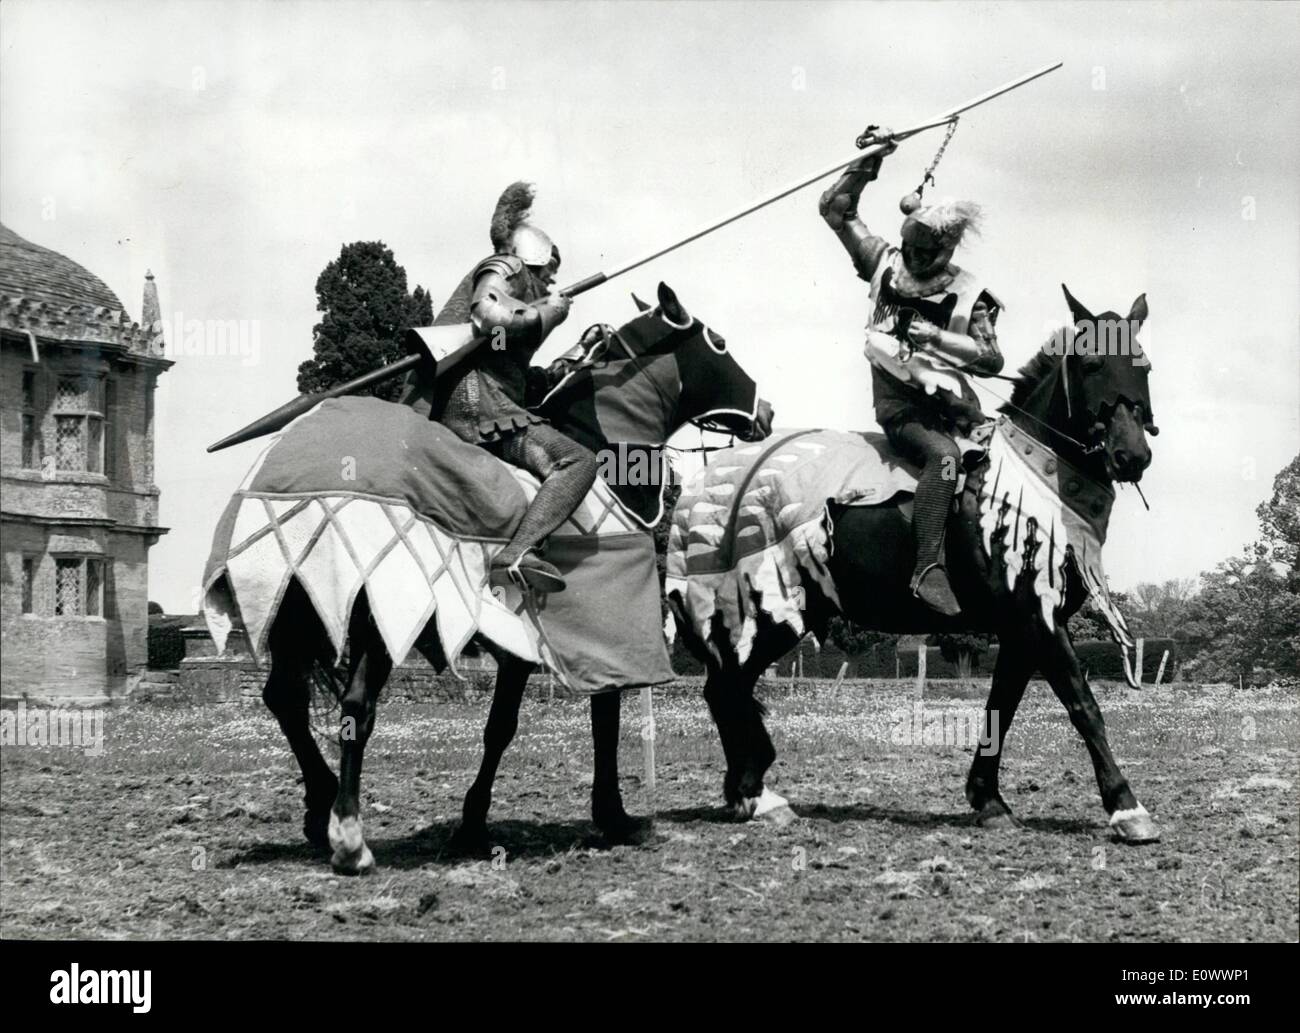 May 05, 1964 - Jousting - Down In Somerset.. Lances And ''Coshes''.. Jousting between knights armed with lances and swords will Stock Photo